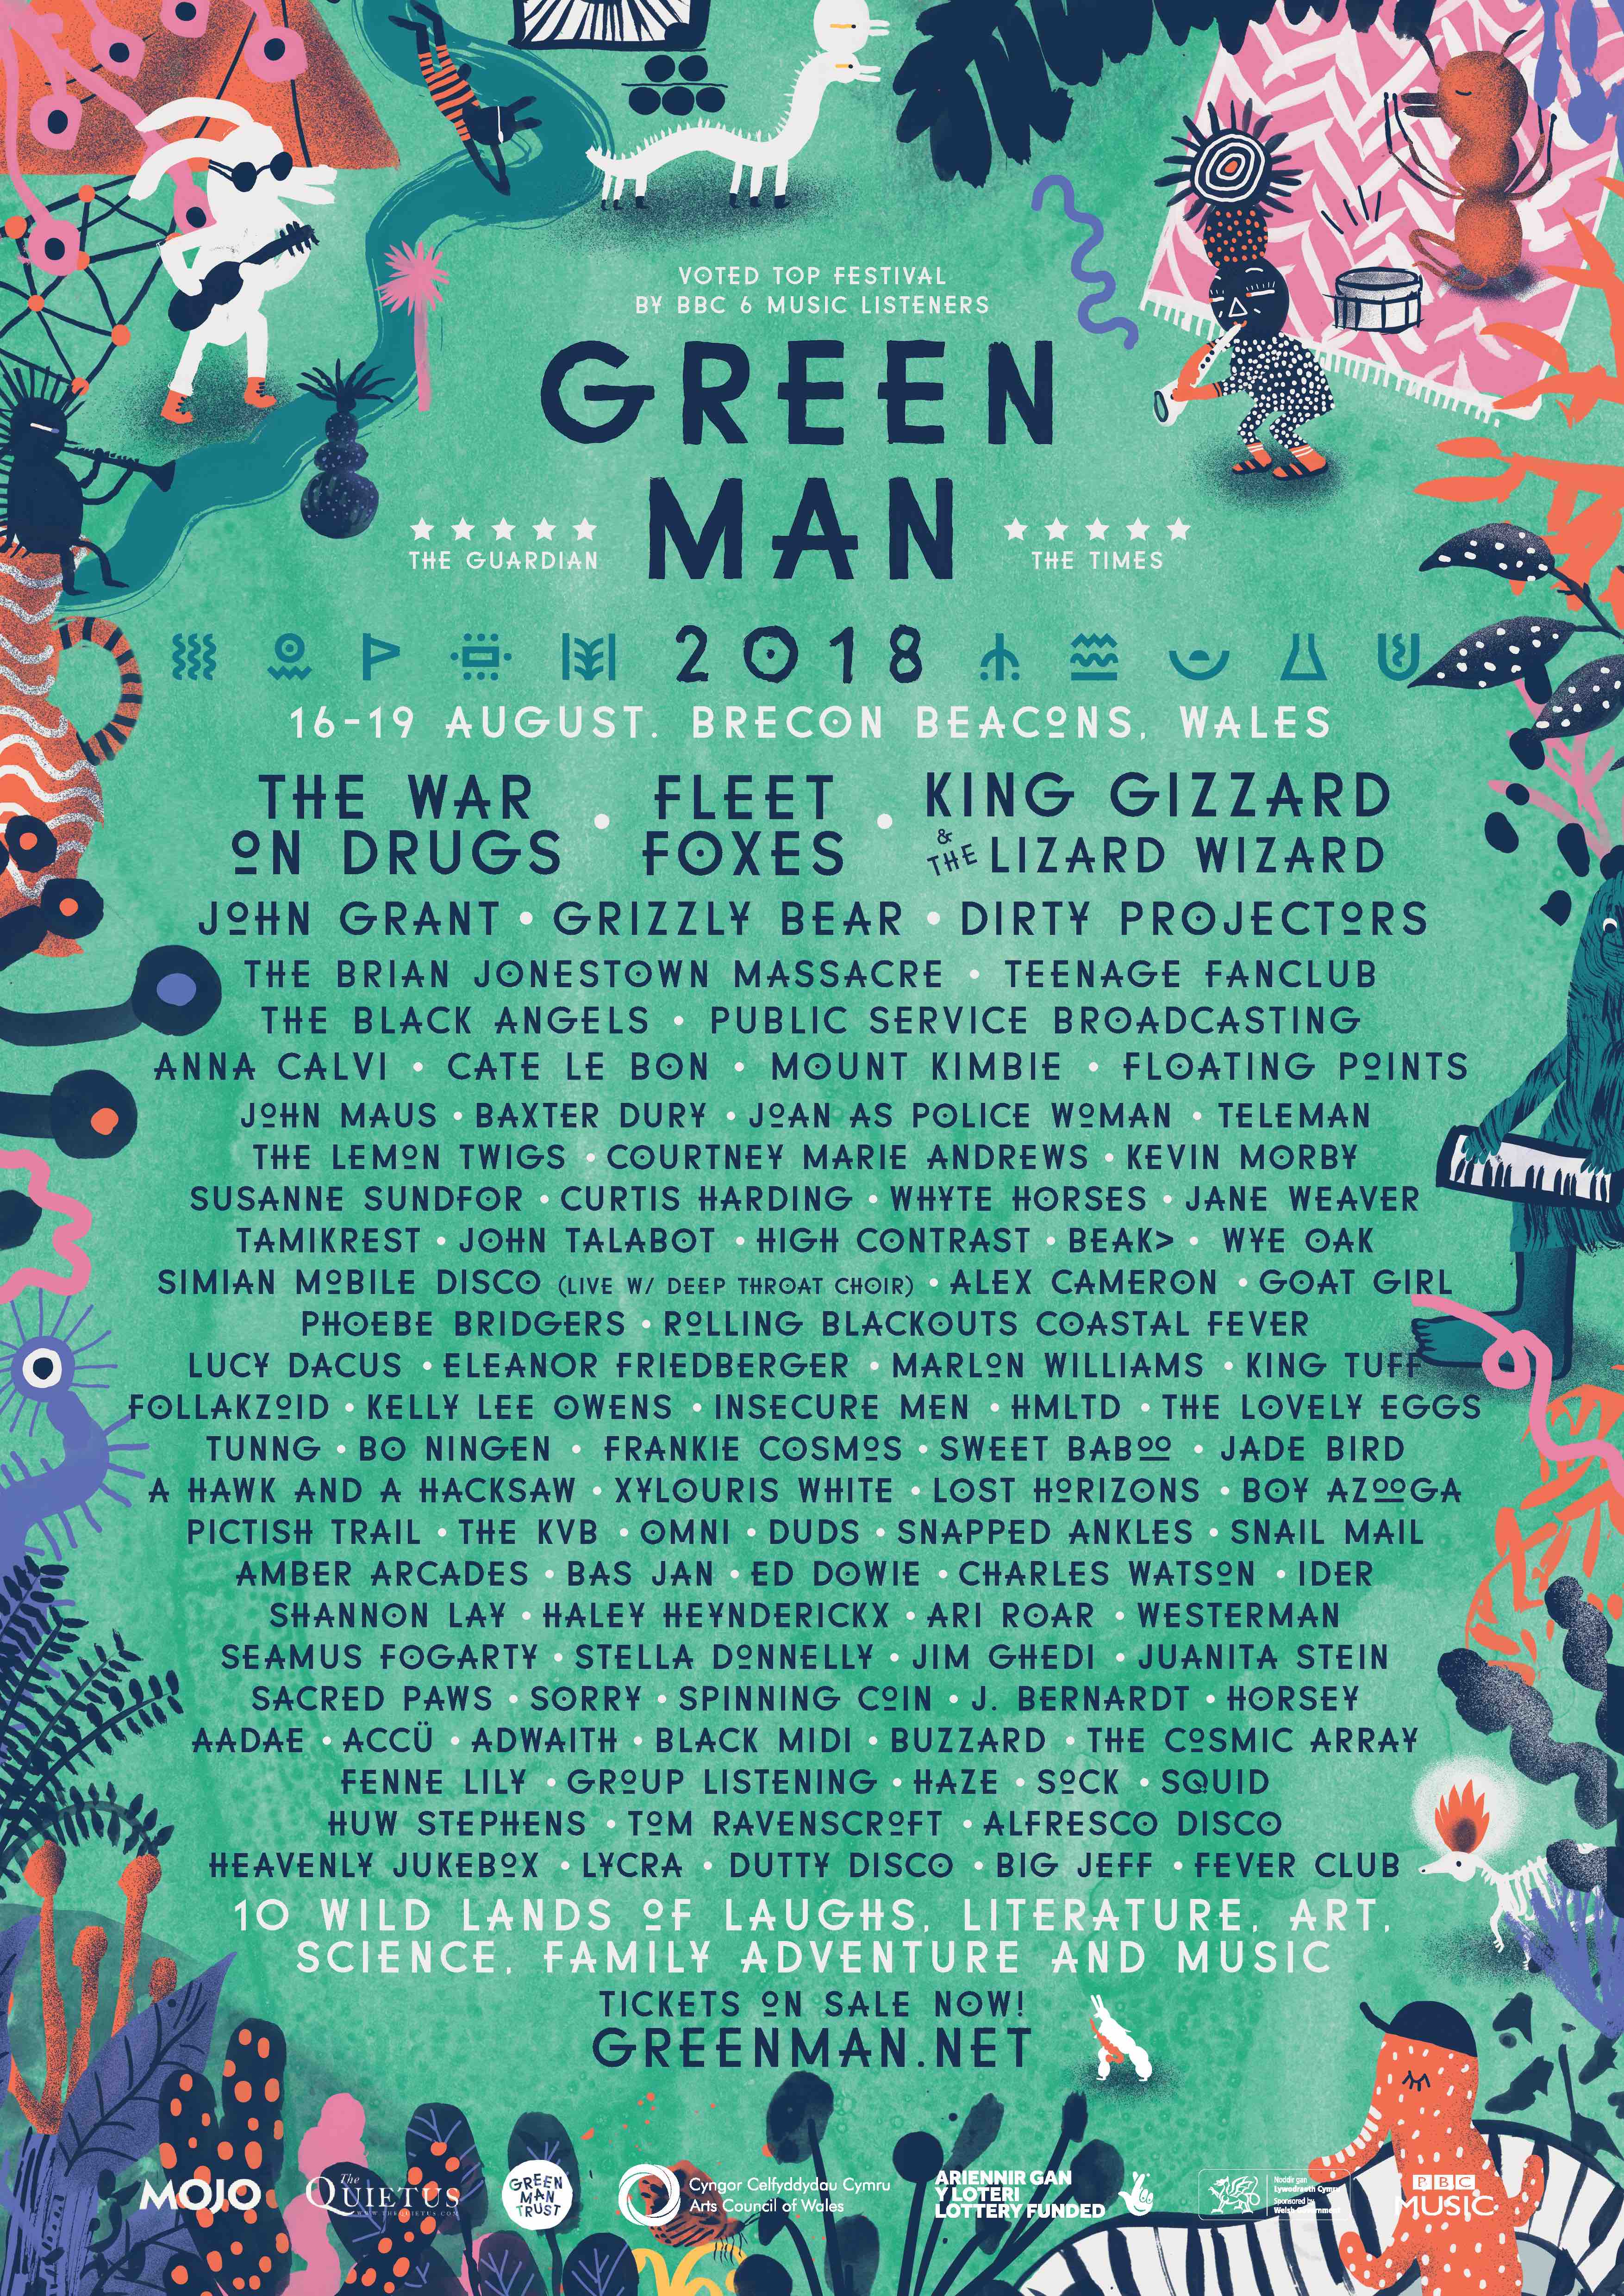 Green Man Festival completes its 2018 lineup with final